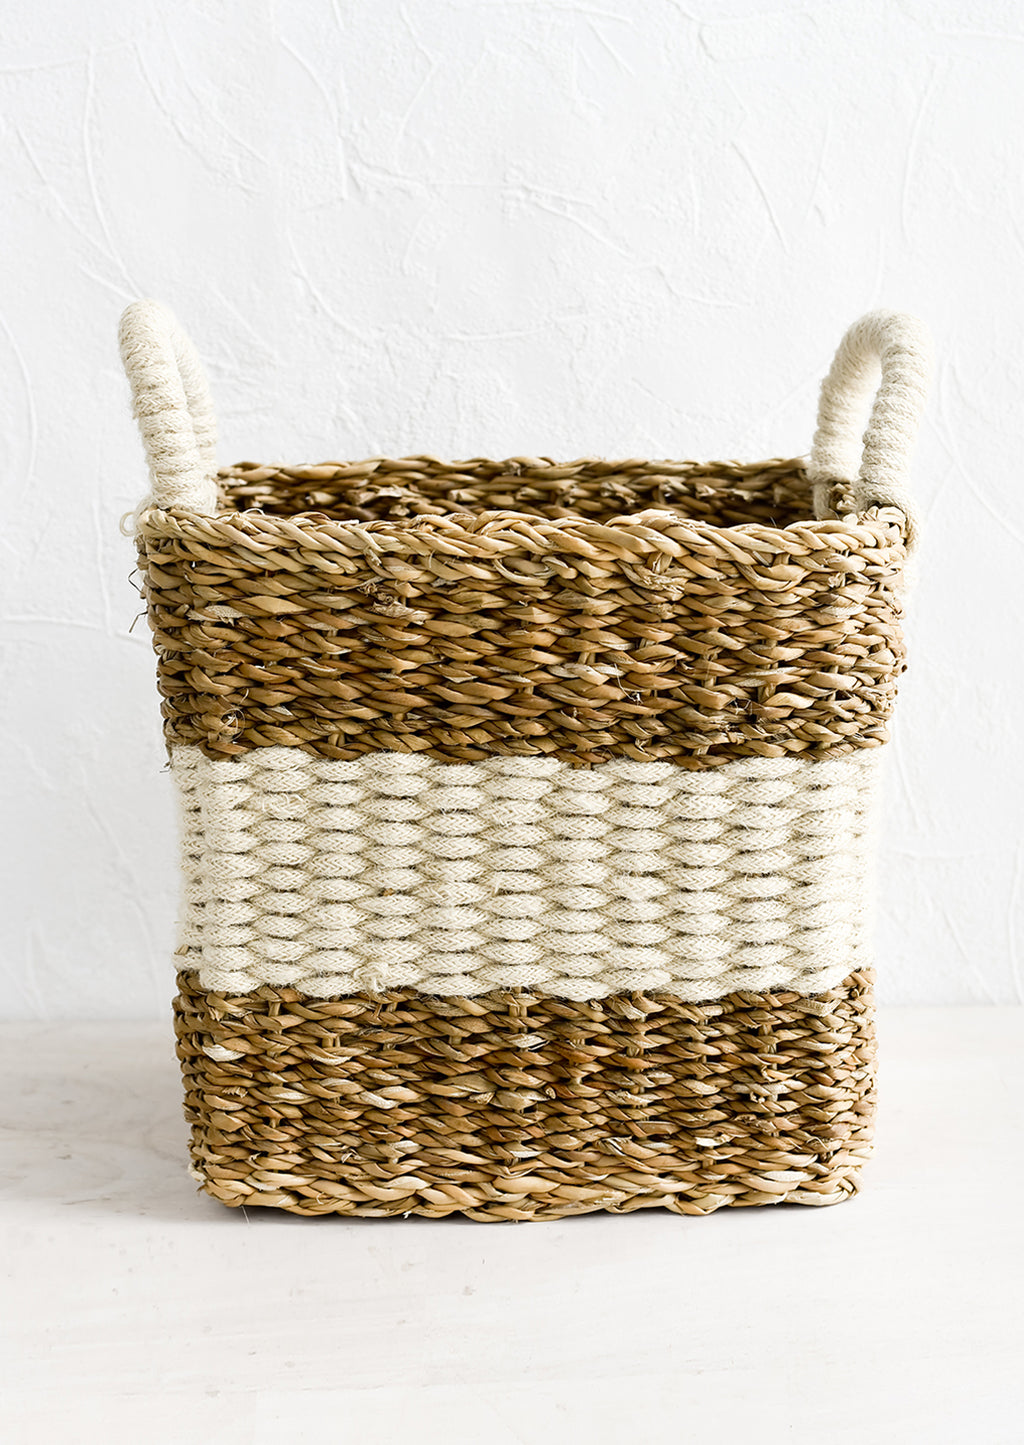 Medium [$85.00]: A square storage basket in woven straw and jute, medium size.